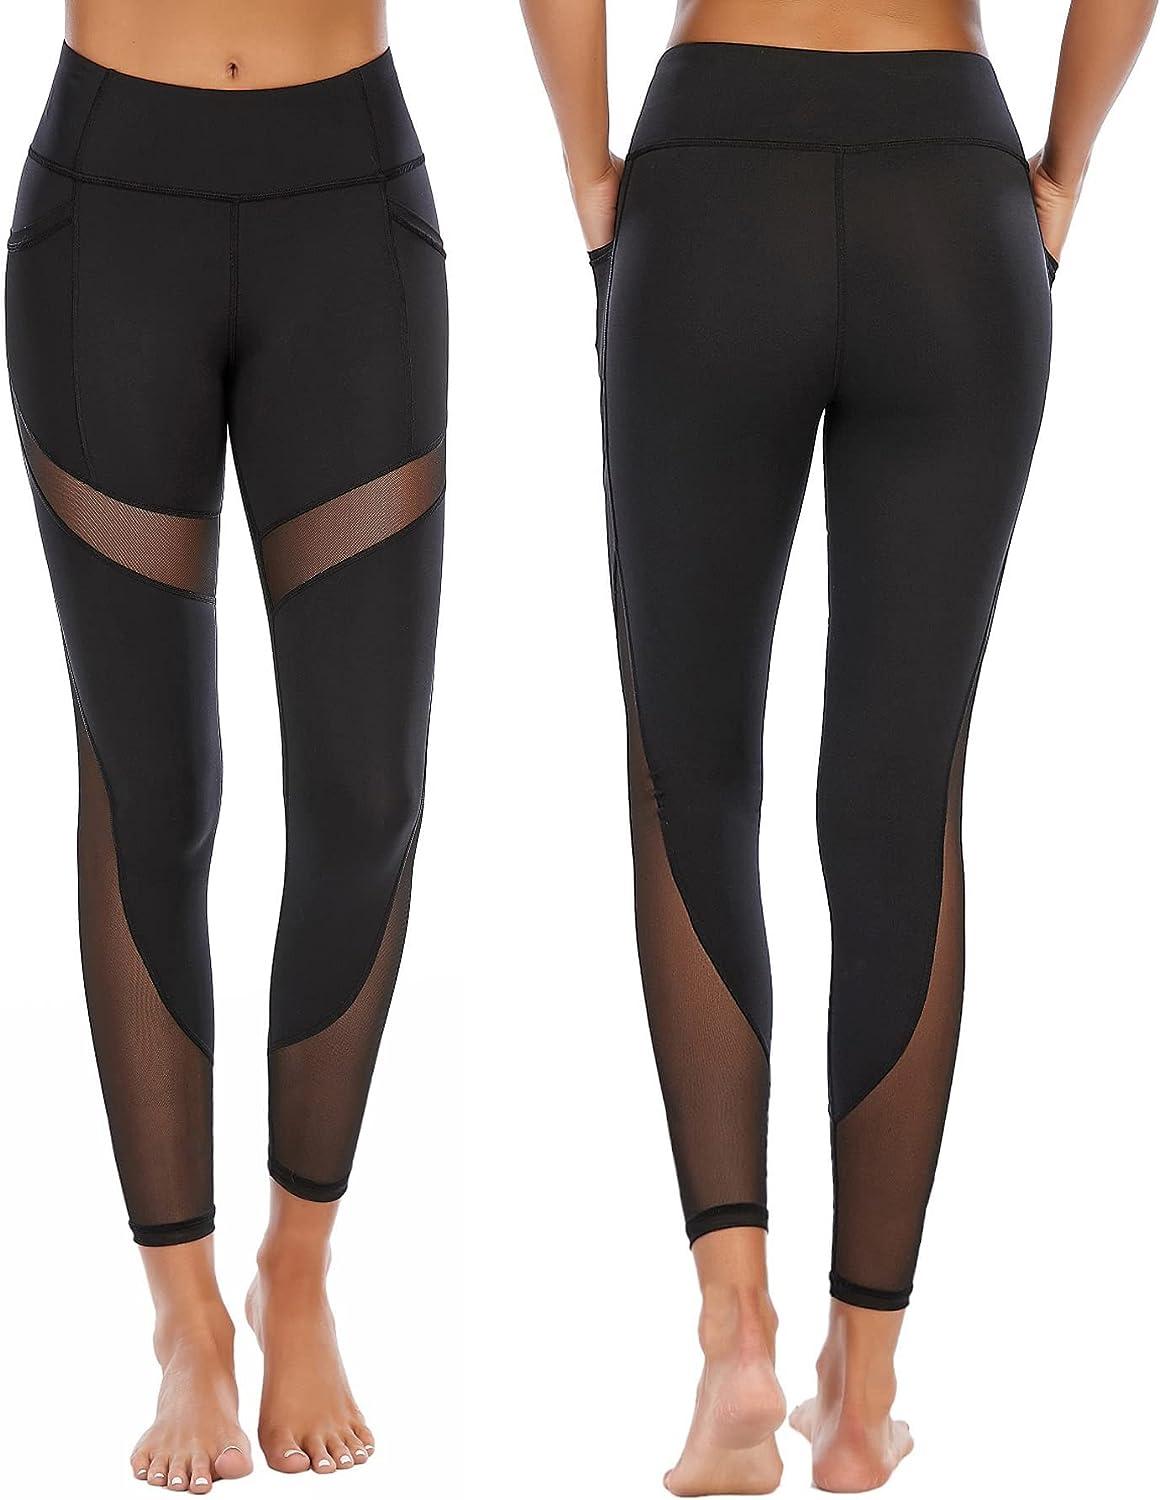 Yoga Trendy Running Tights High Stretch Wide Waistband Sports Leggings With Phone  Pocket